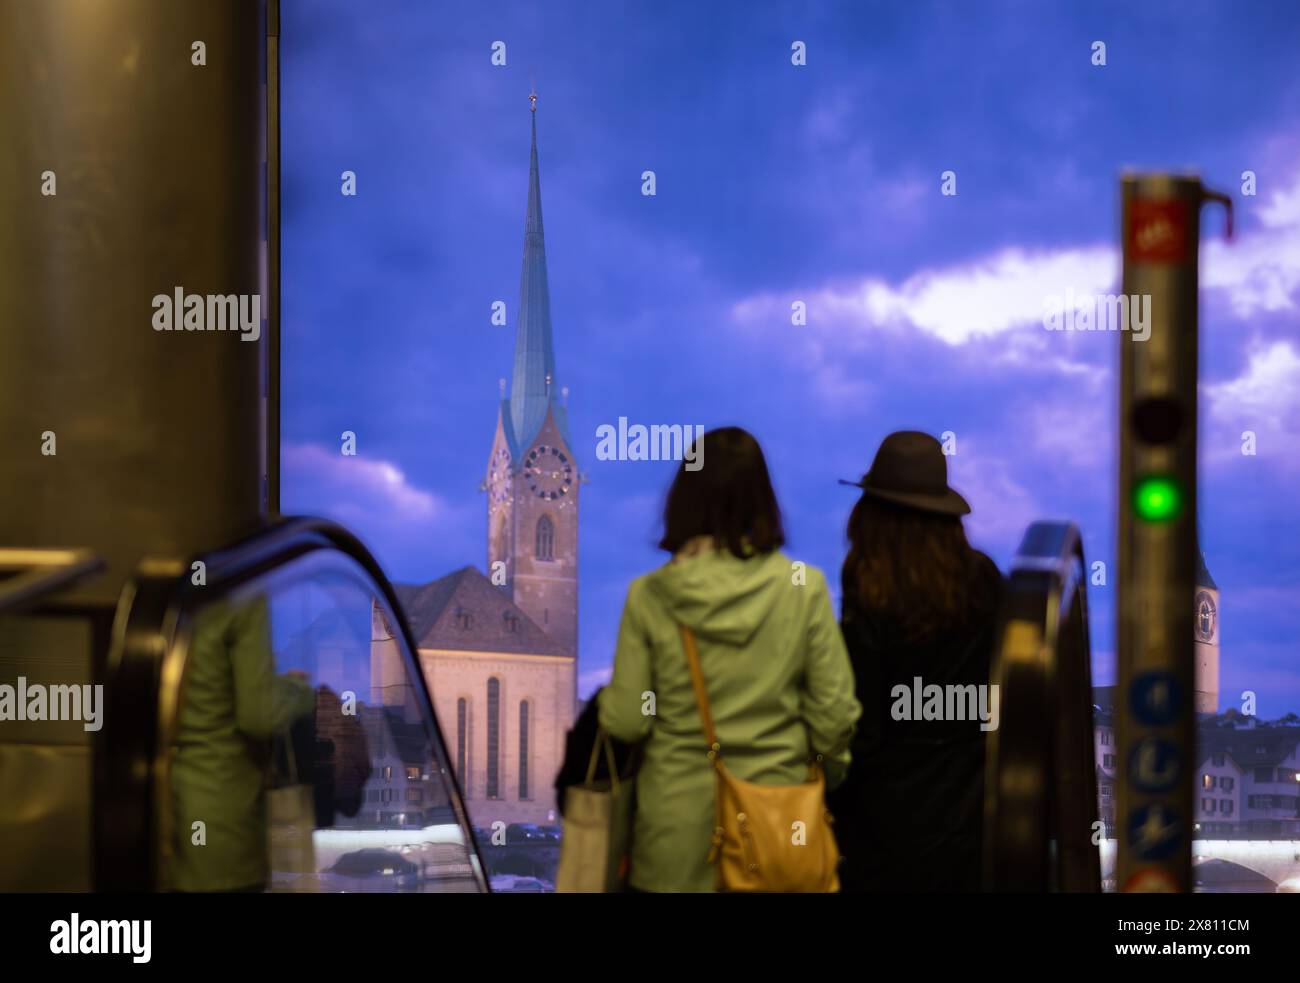 Zurich, Switzerland - May 16, 2024: Two individuals on escalator, against urban view of Zurich with historic church and dramatic sky. Stock Photo